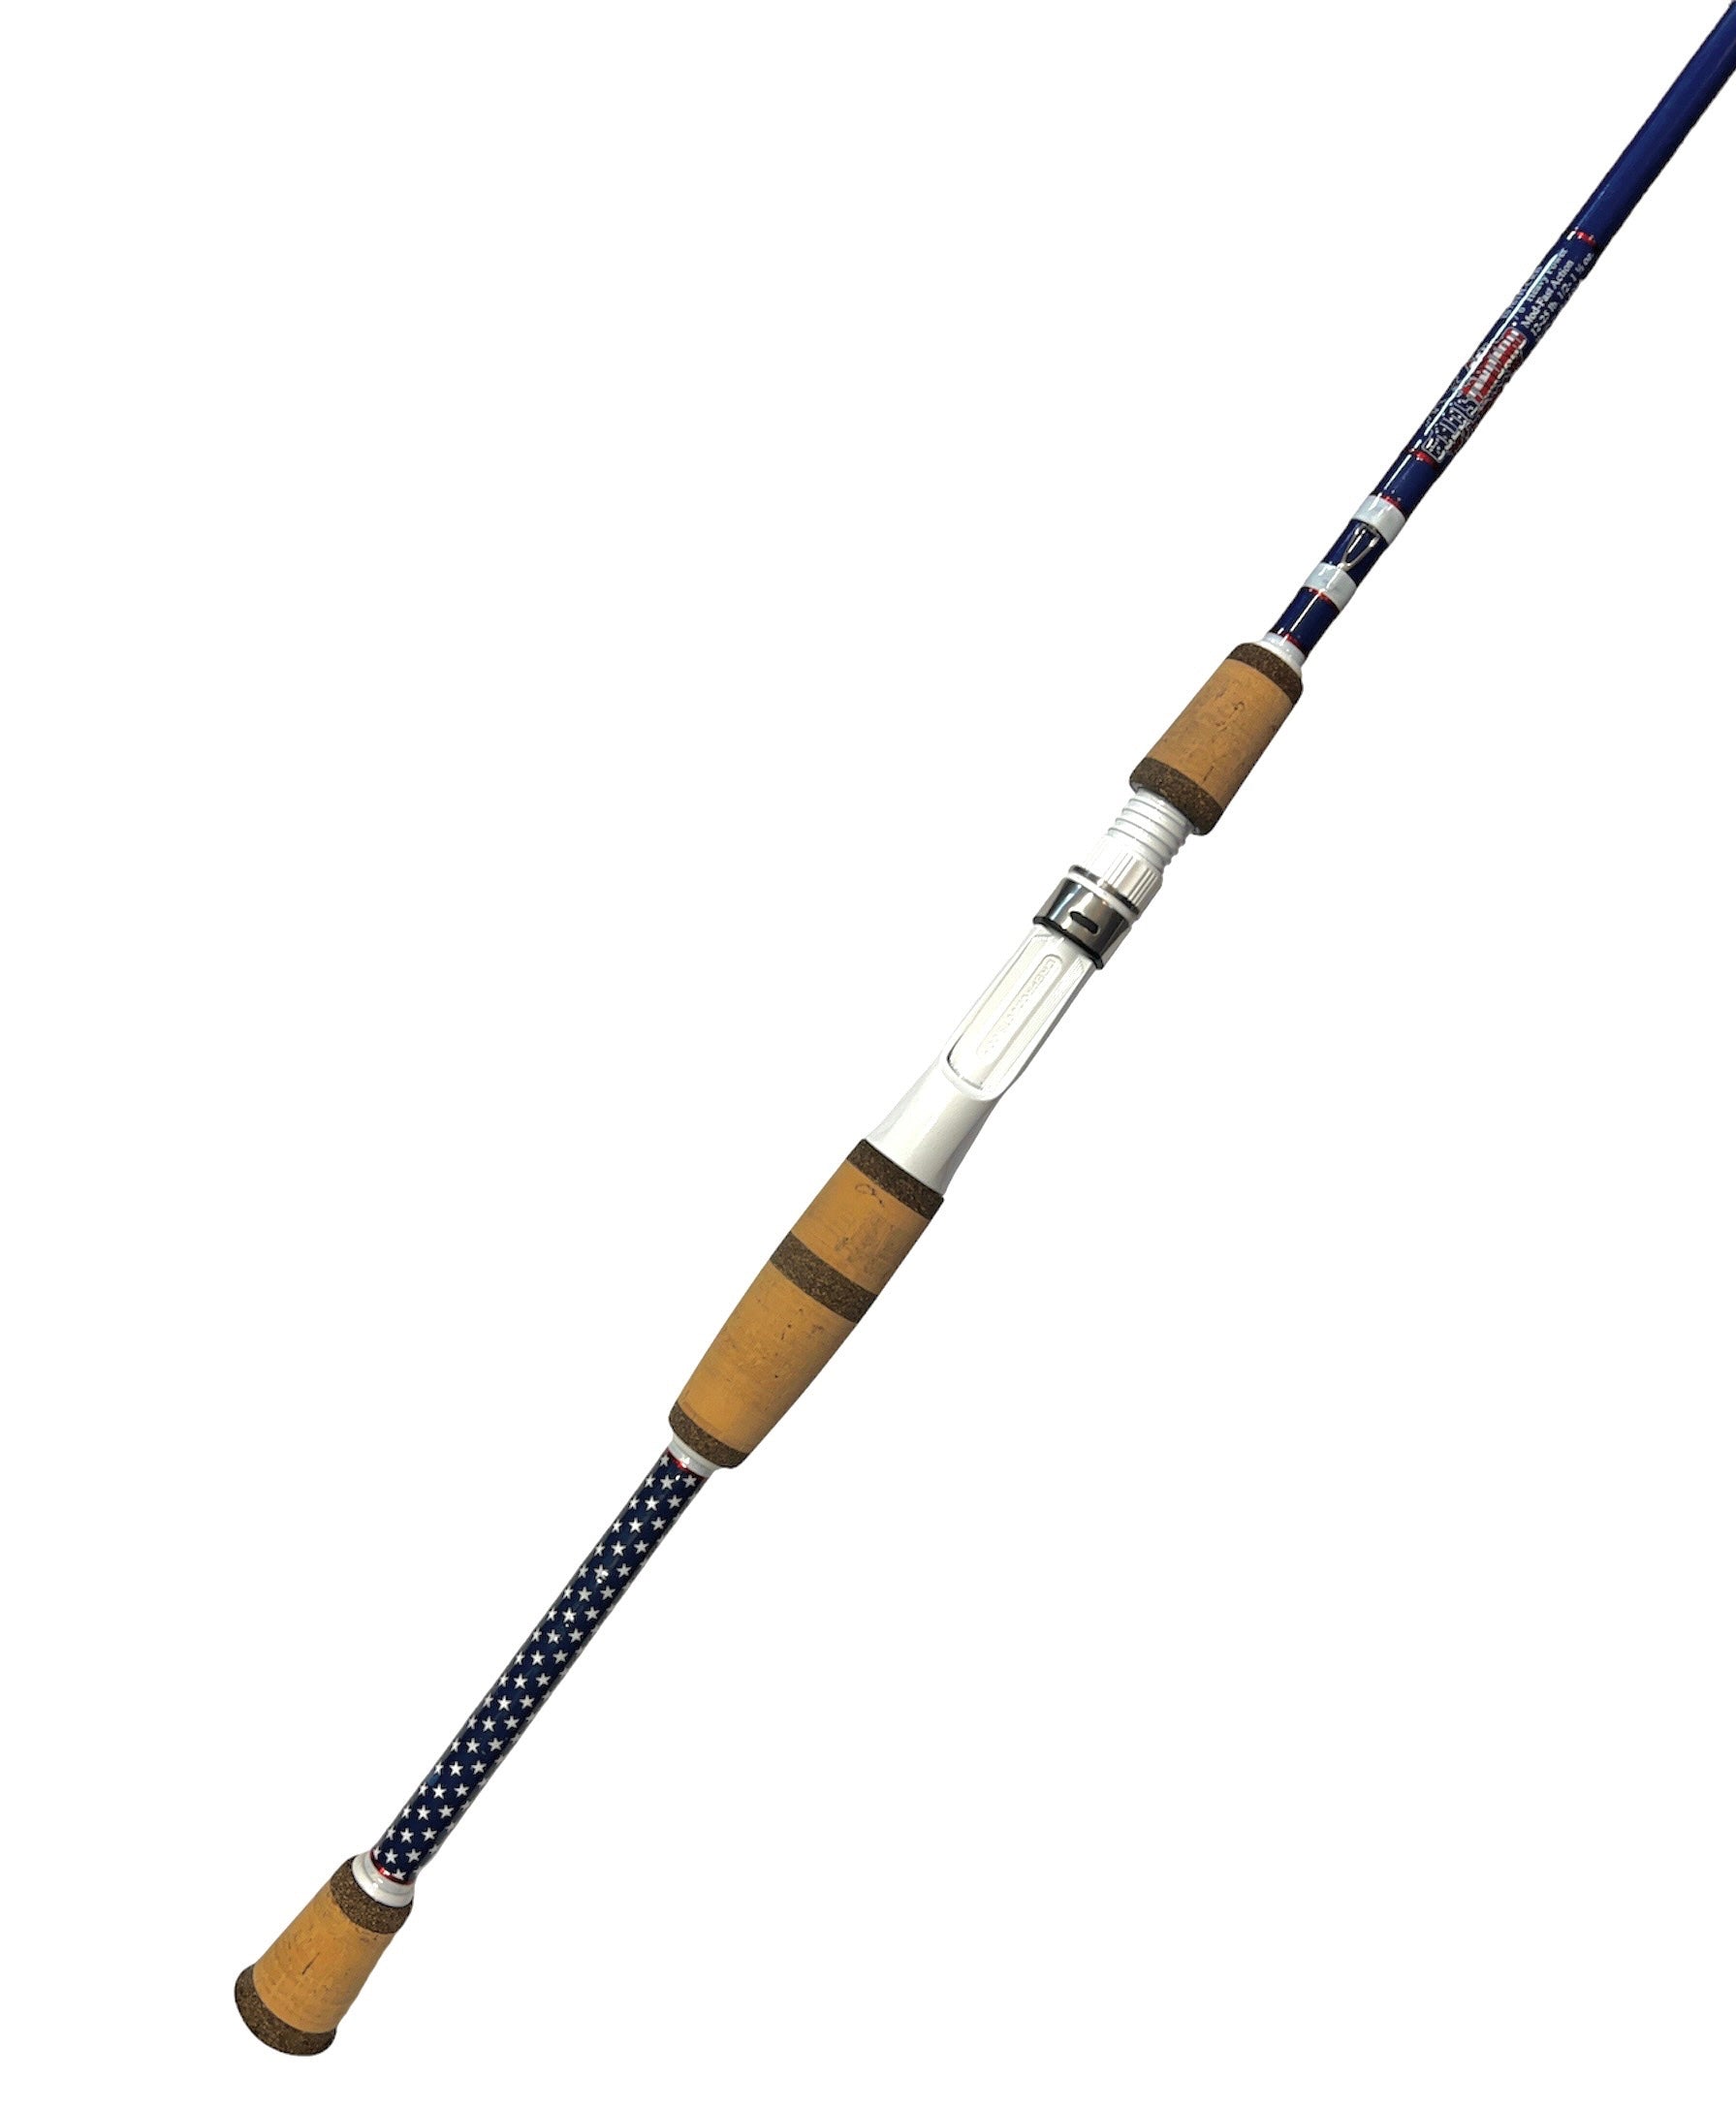 7'6 Heavy Power Mod-Fast Action Pre-Built Casting Rod - Blue & White –  Gold Standard Outdoors